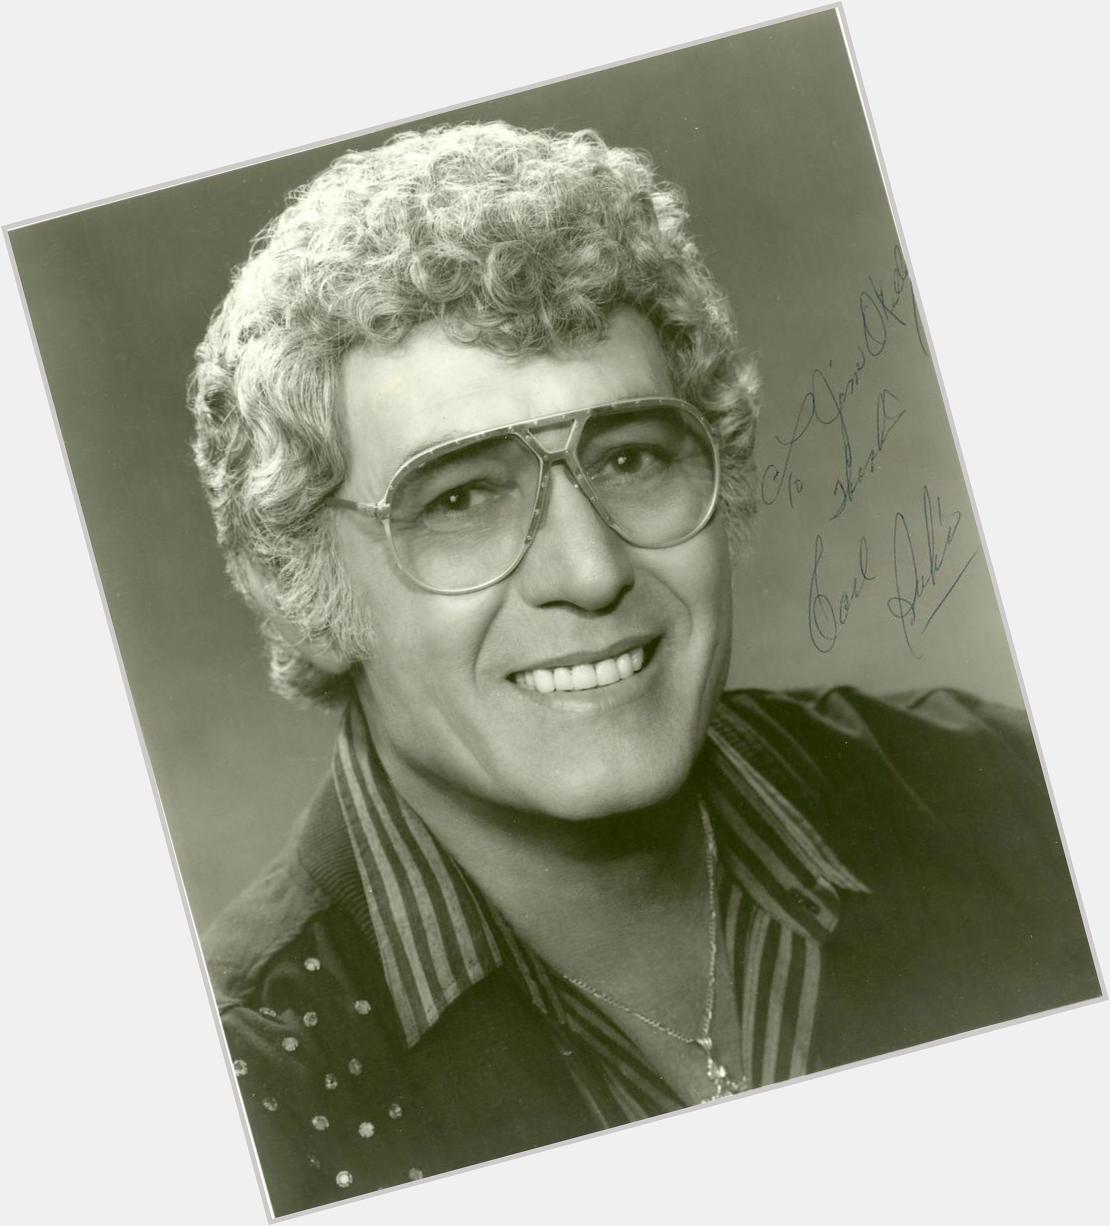 April 9th Happy Birthday & RIP to the great Carl Perkins 